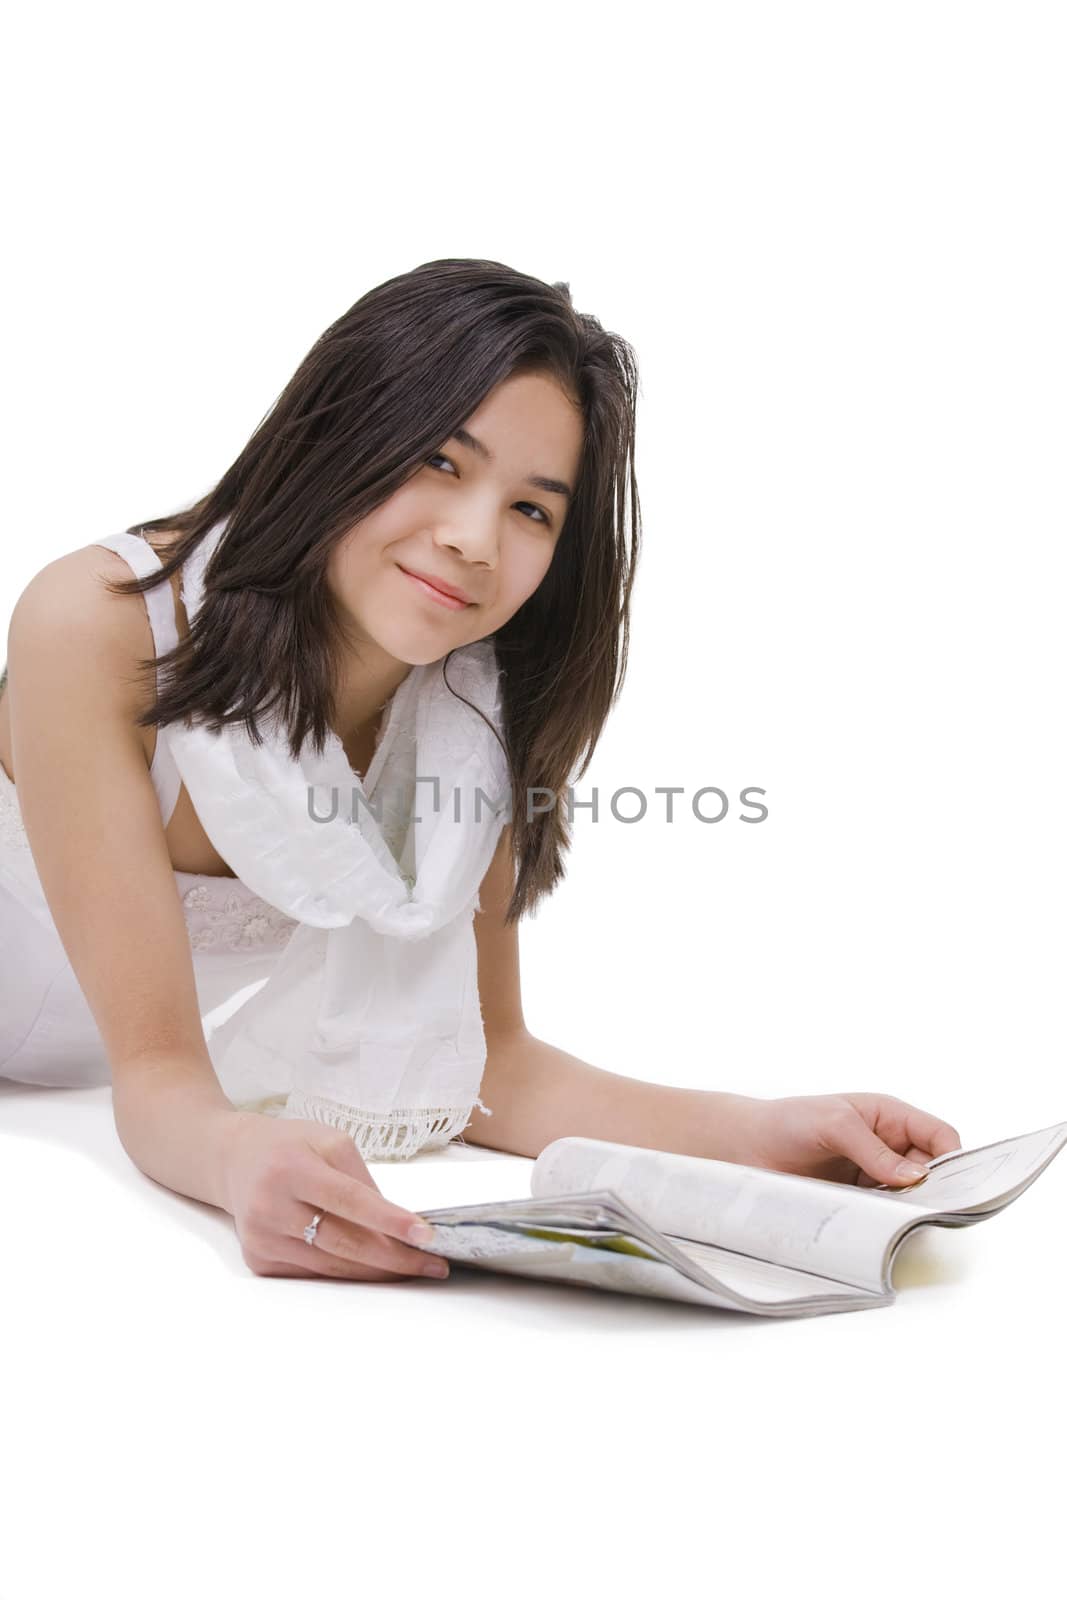 Beautiful young teen girl in white dress or gown lying down reading a magazine, isolated on white